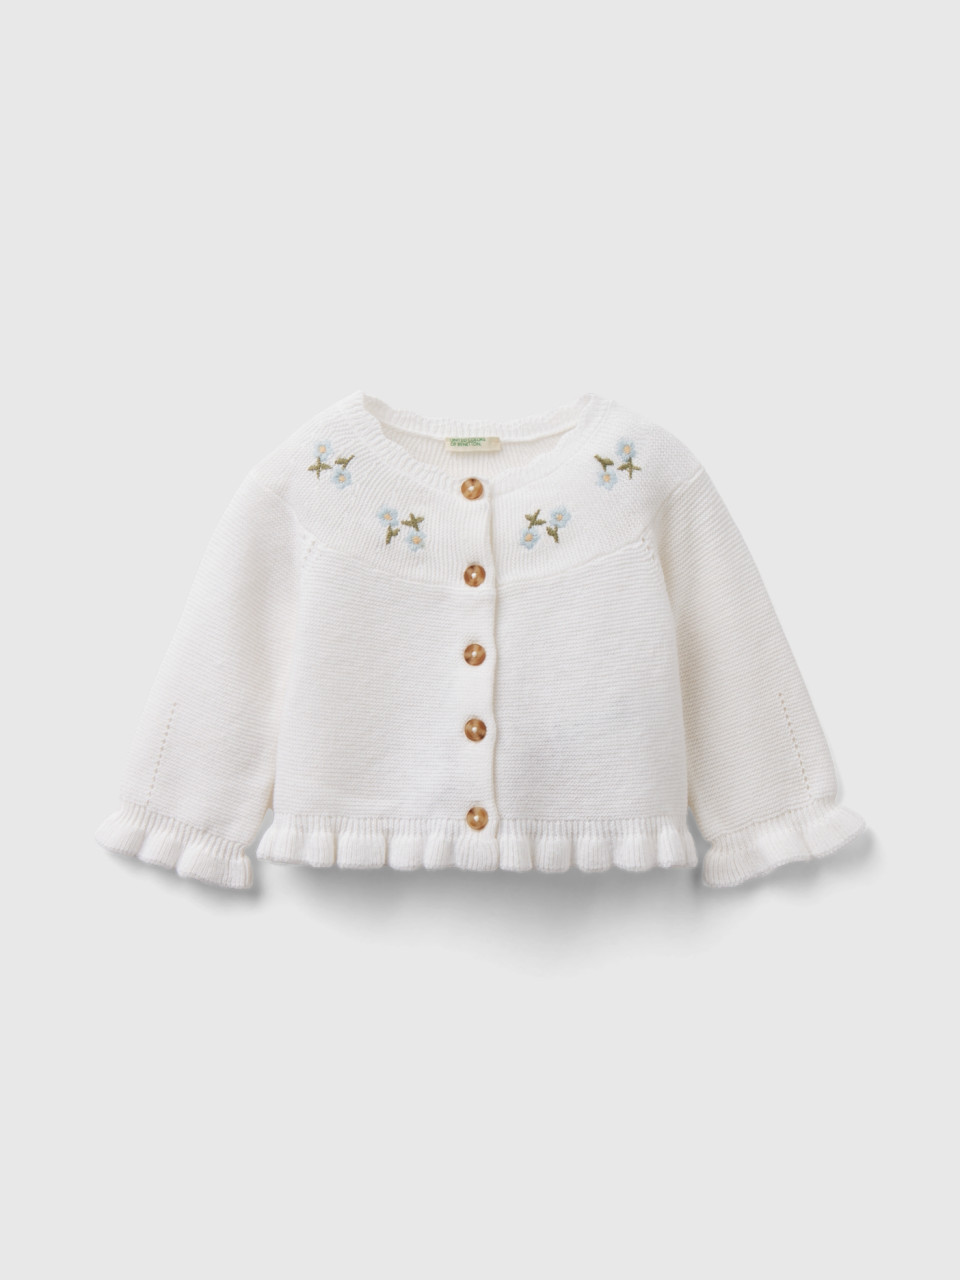 Benetton, Cardigan In Linen Blend With Embroidery, White, Kids